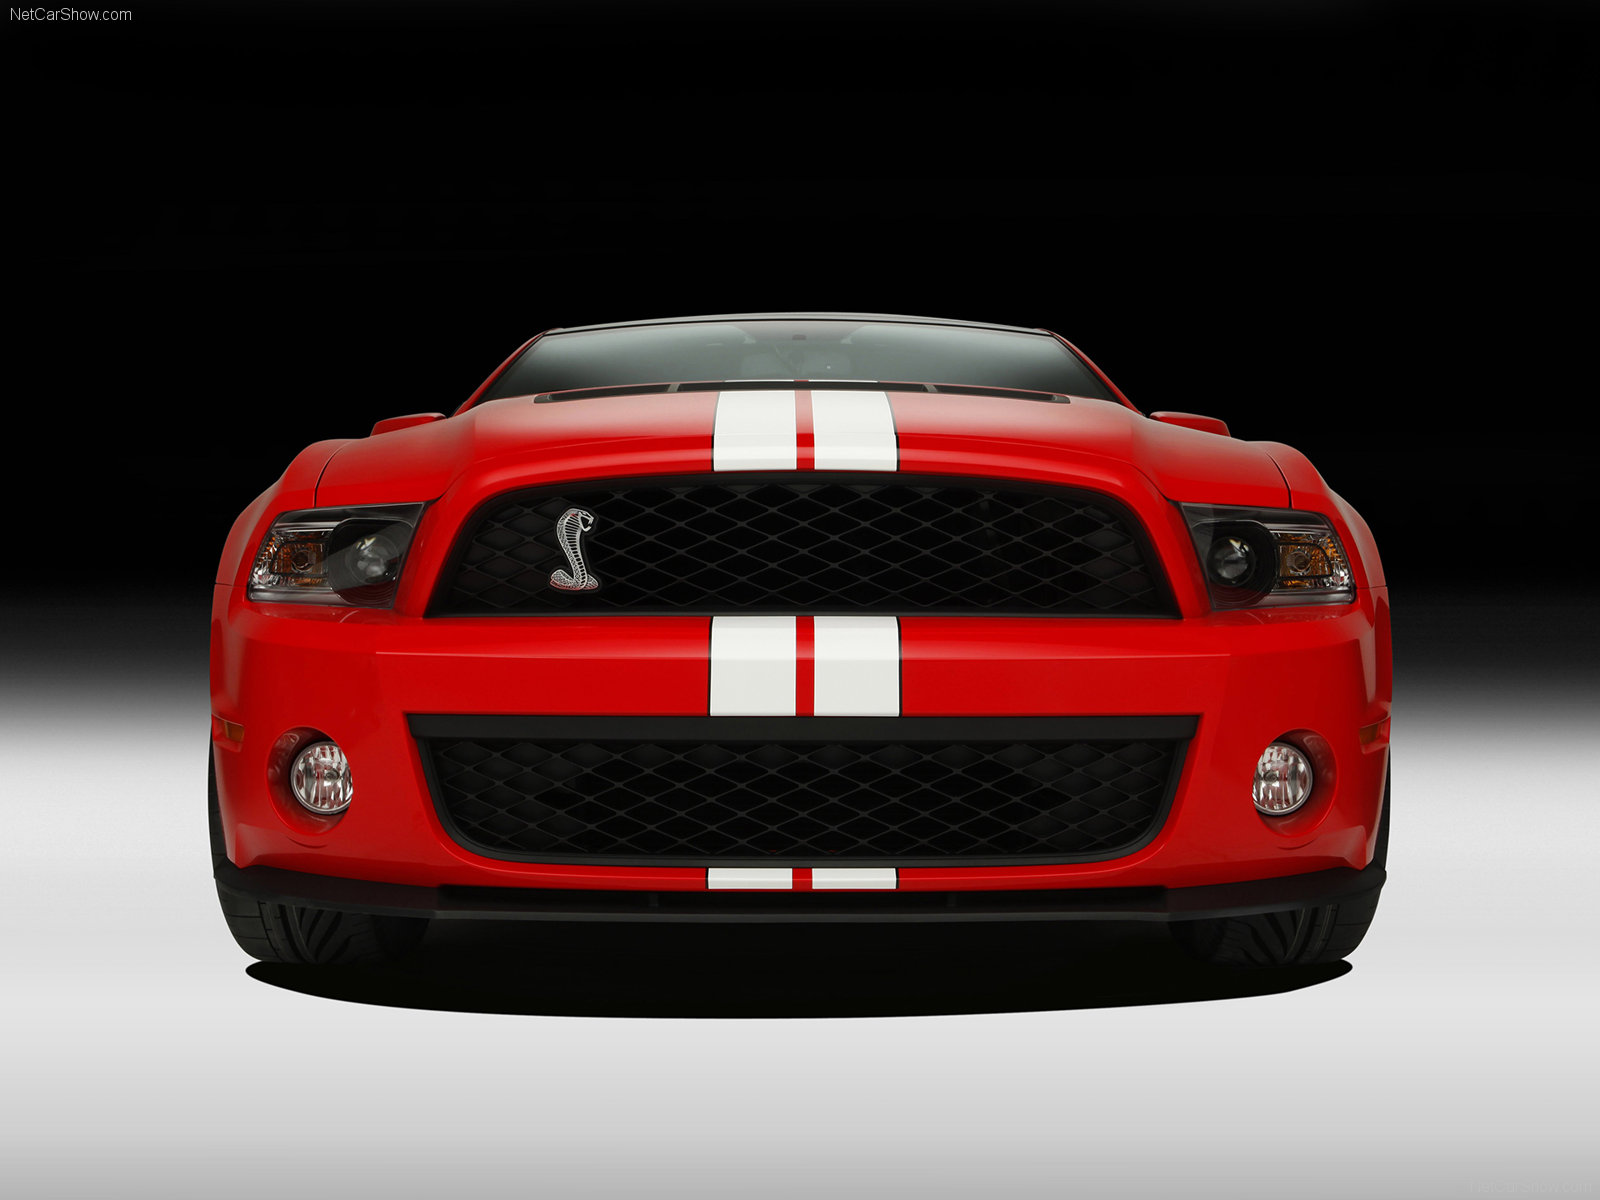 Ford Mustang Shelby GT500 photo 71522